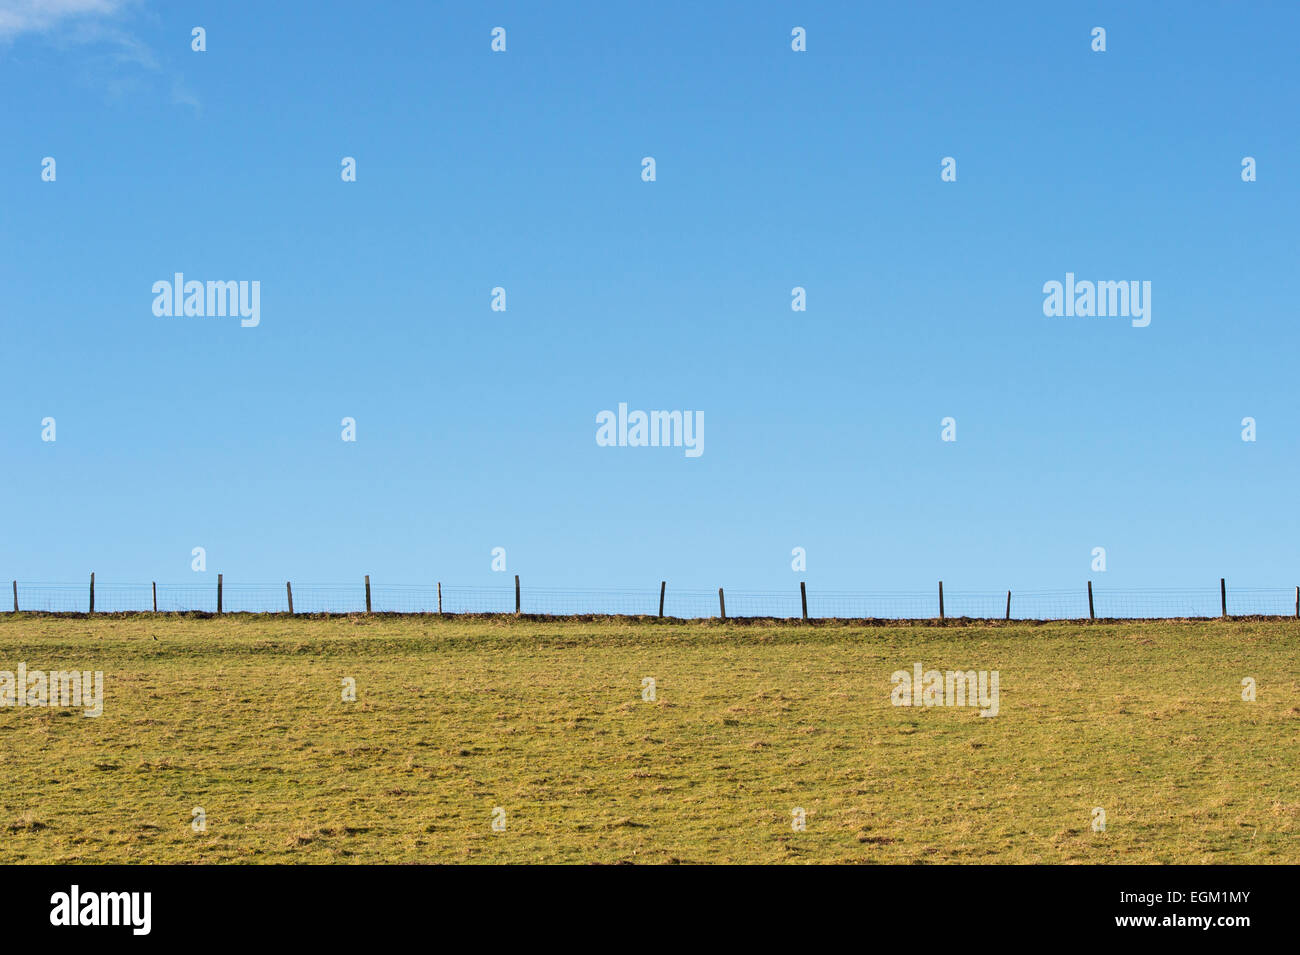 Fence line in a field with blue sky Stock Photo